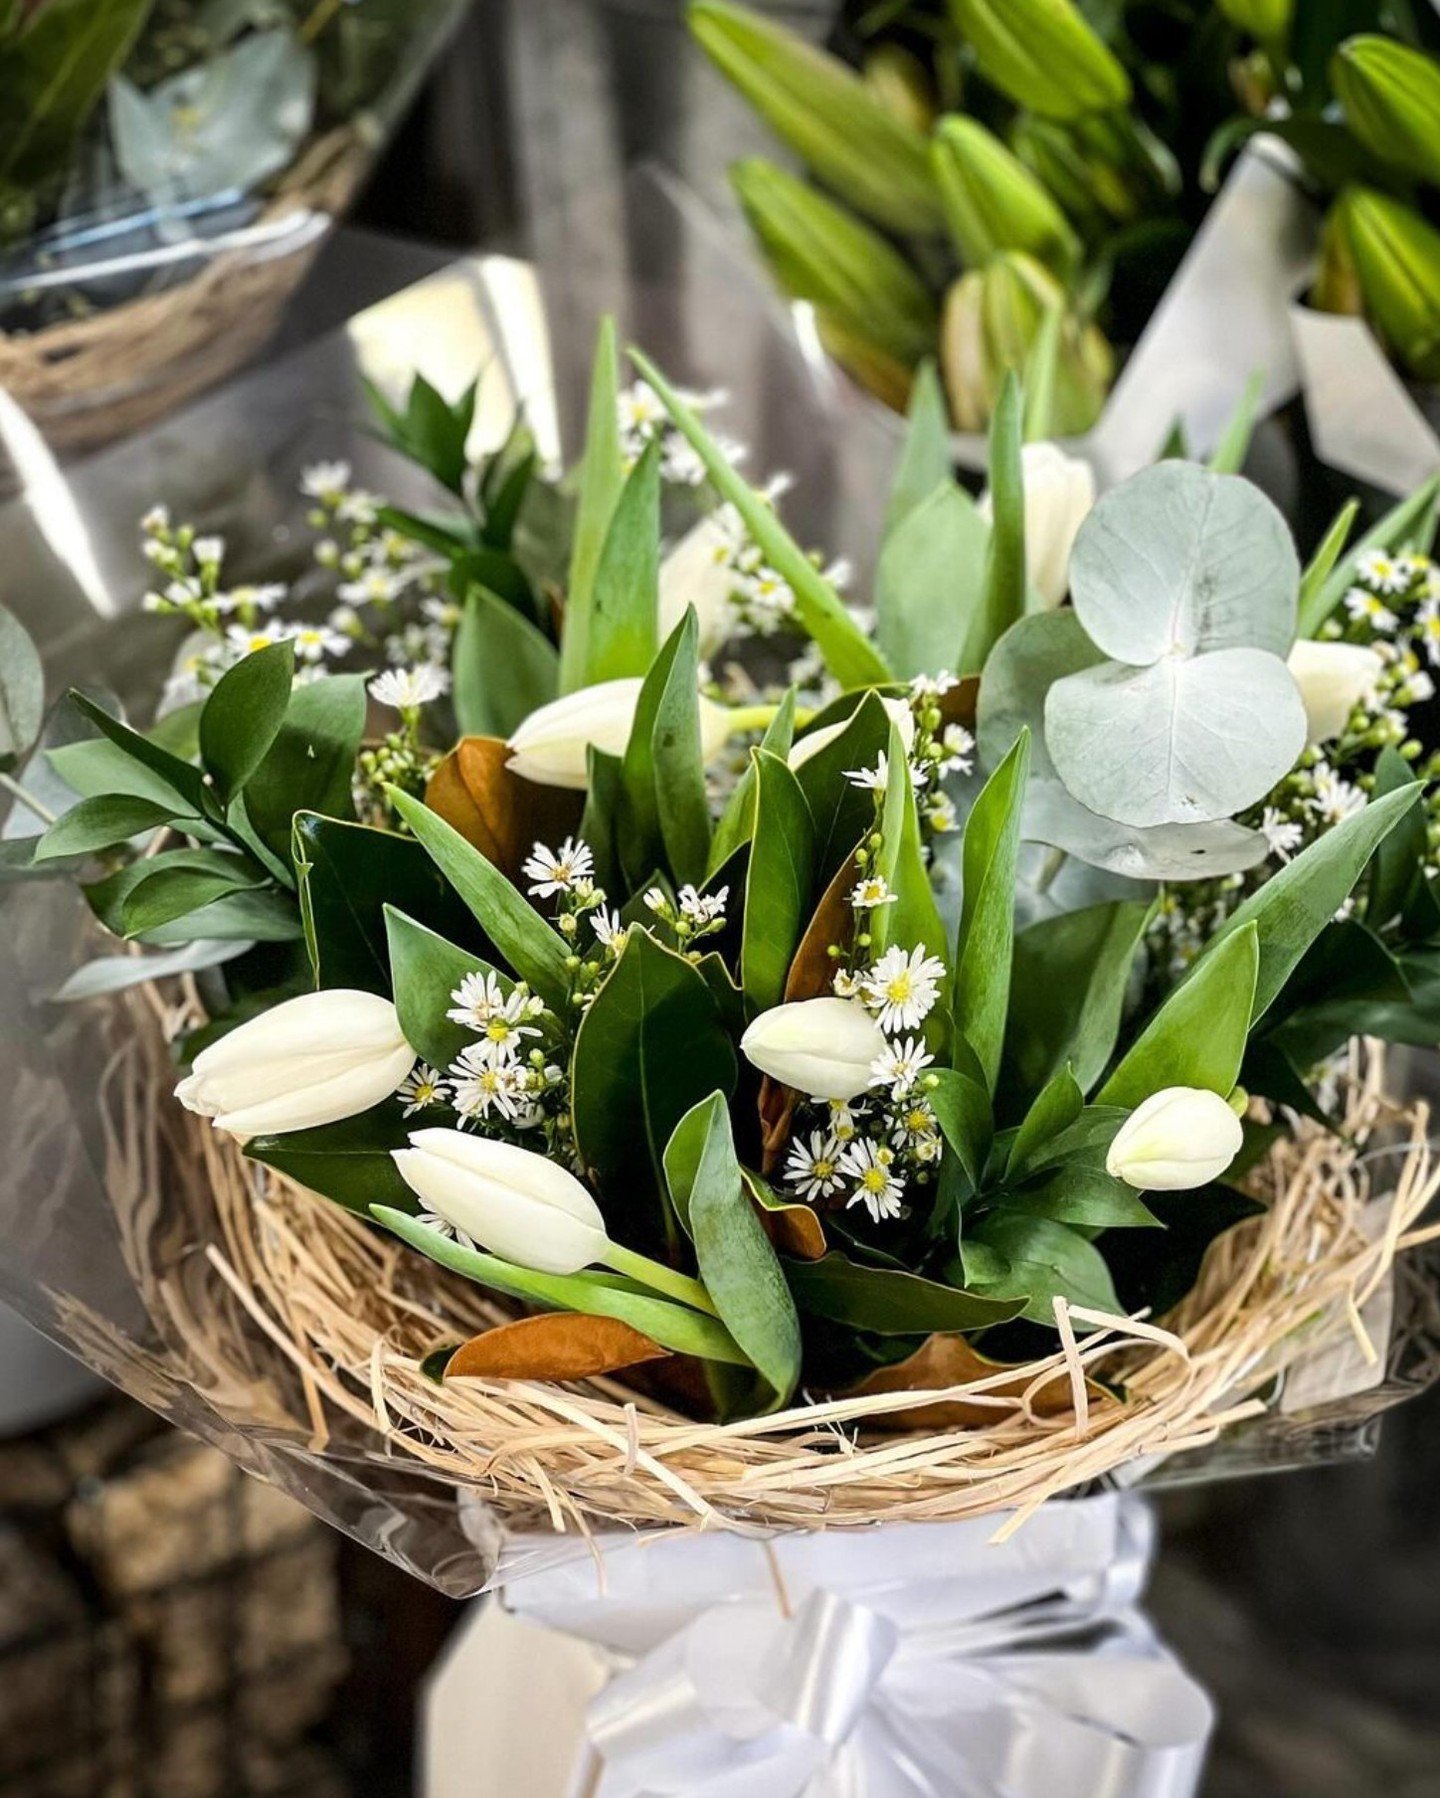 Pssst, in case you forgot, tomorrow is Mother's Day!

The Markets are bursting with beautiful flowers and goodies to spoil the special mother figure in your life. We're open from 7 am so that you can get in early. 🤍